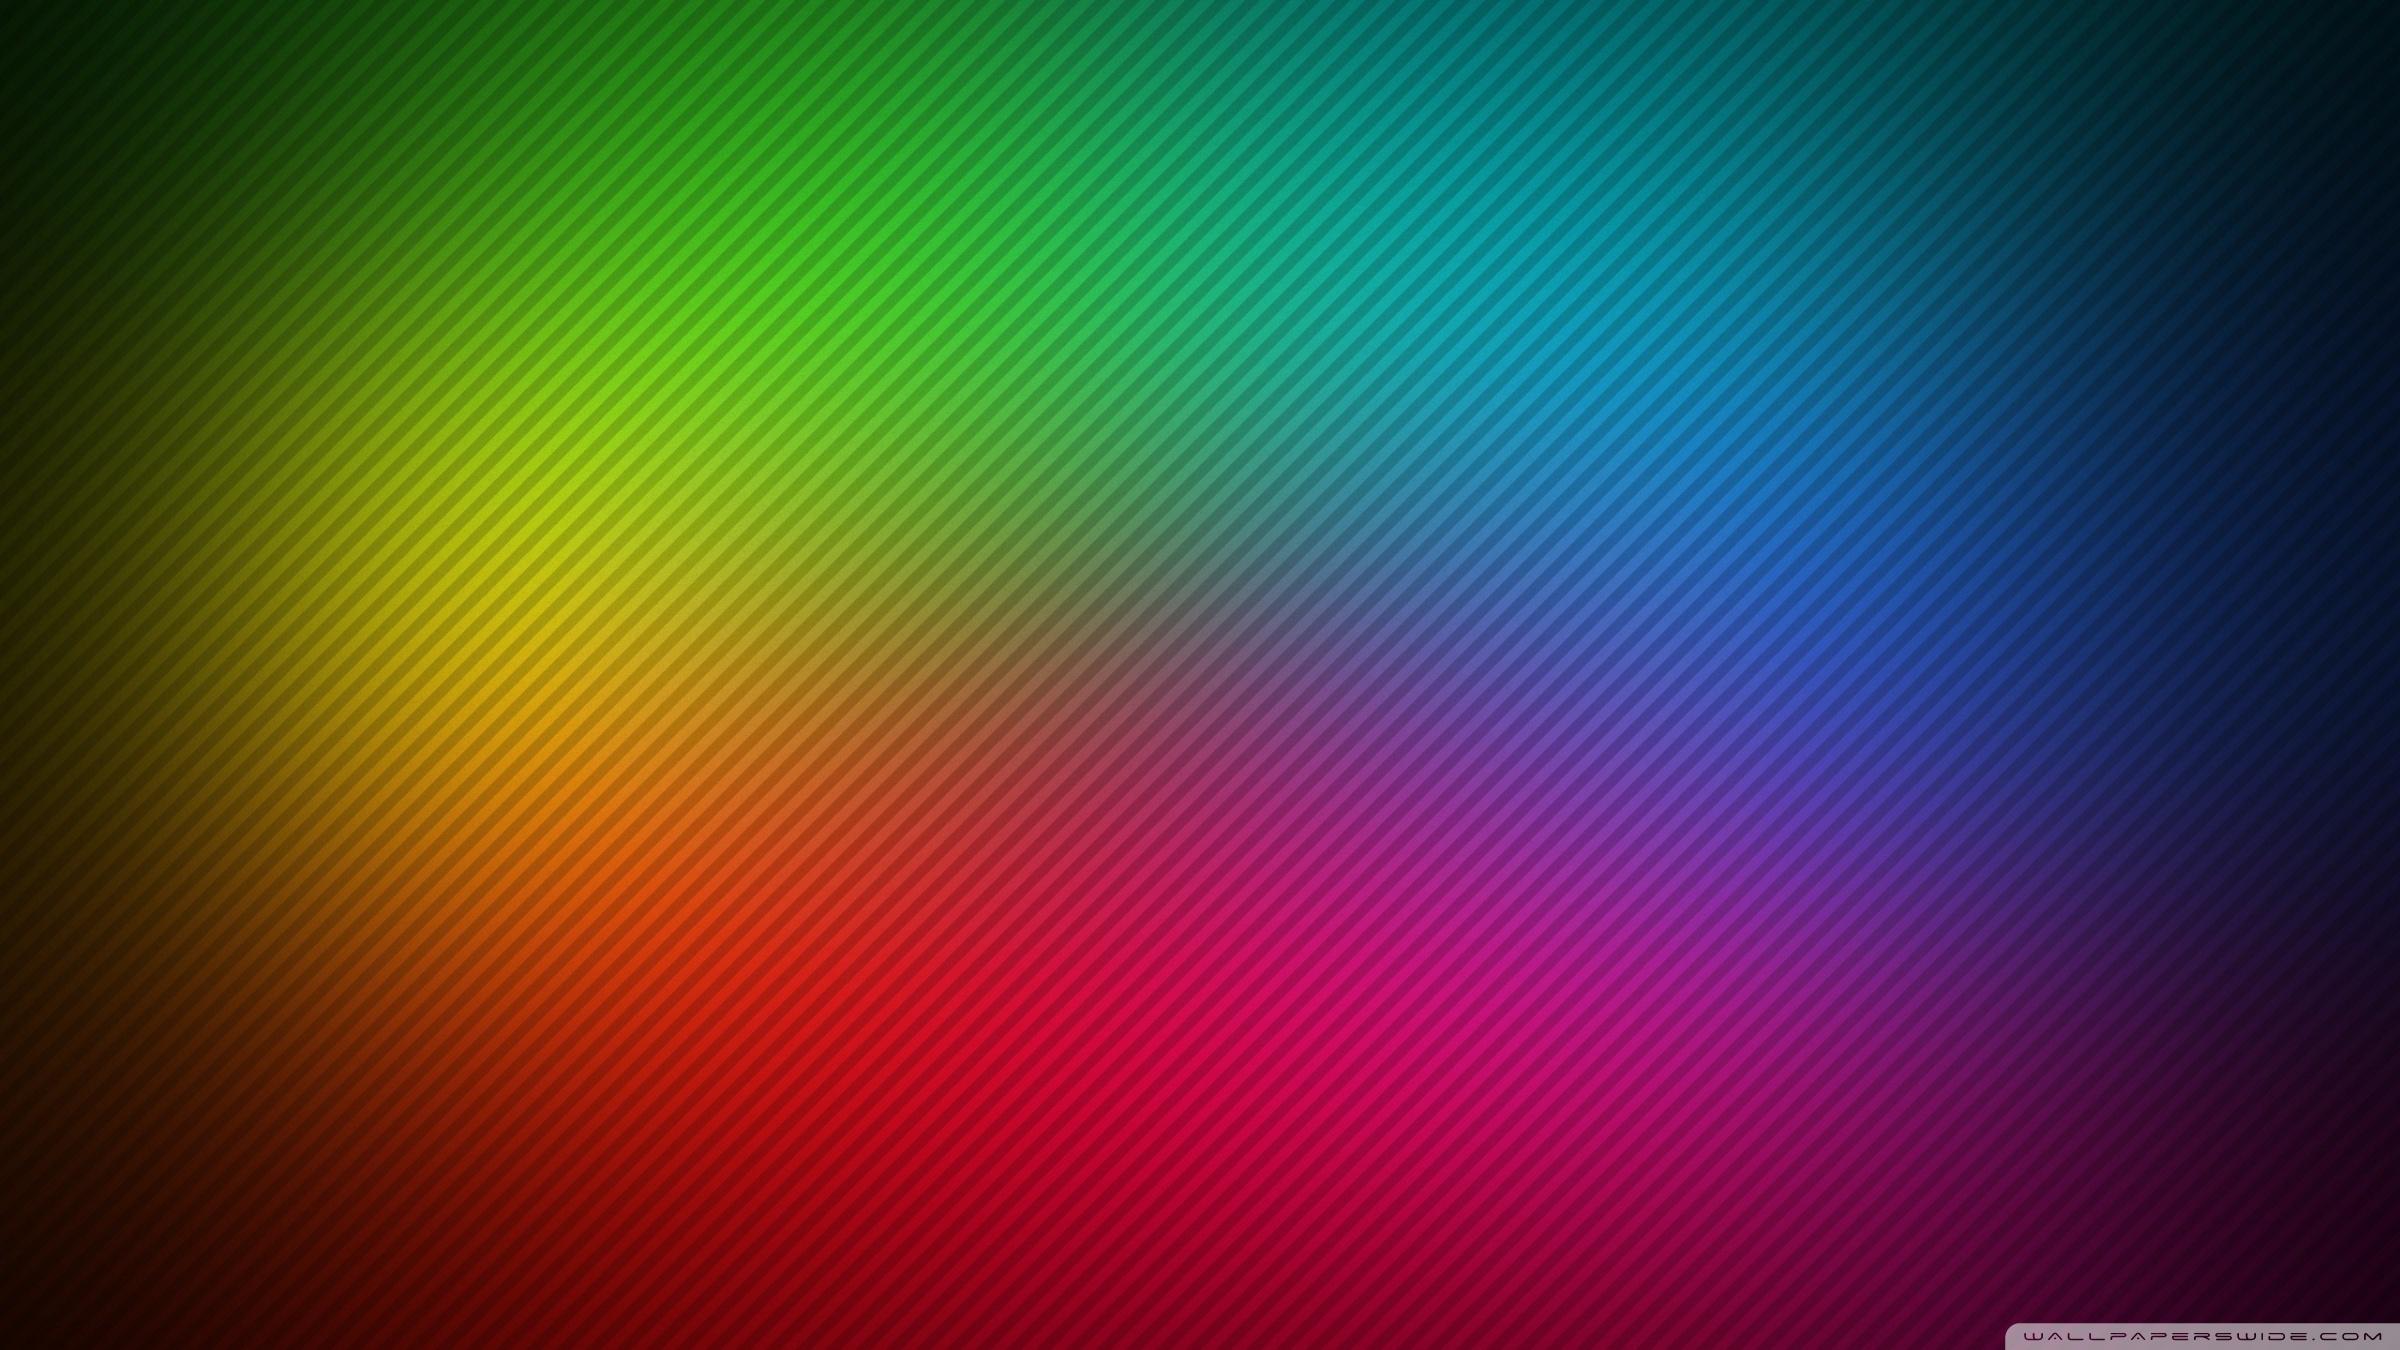 52+] RGB Wallpapers